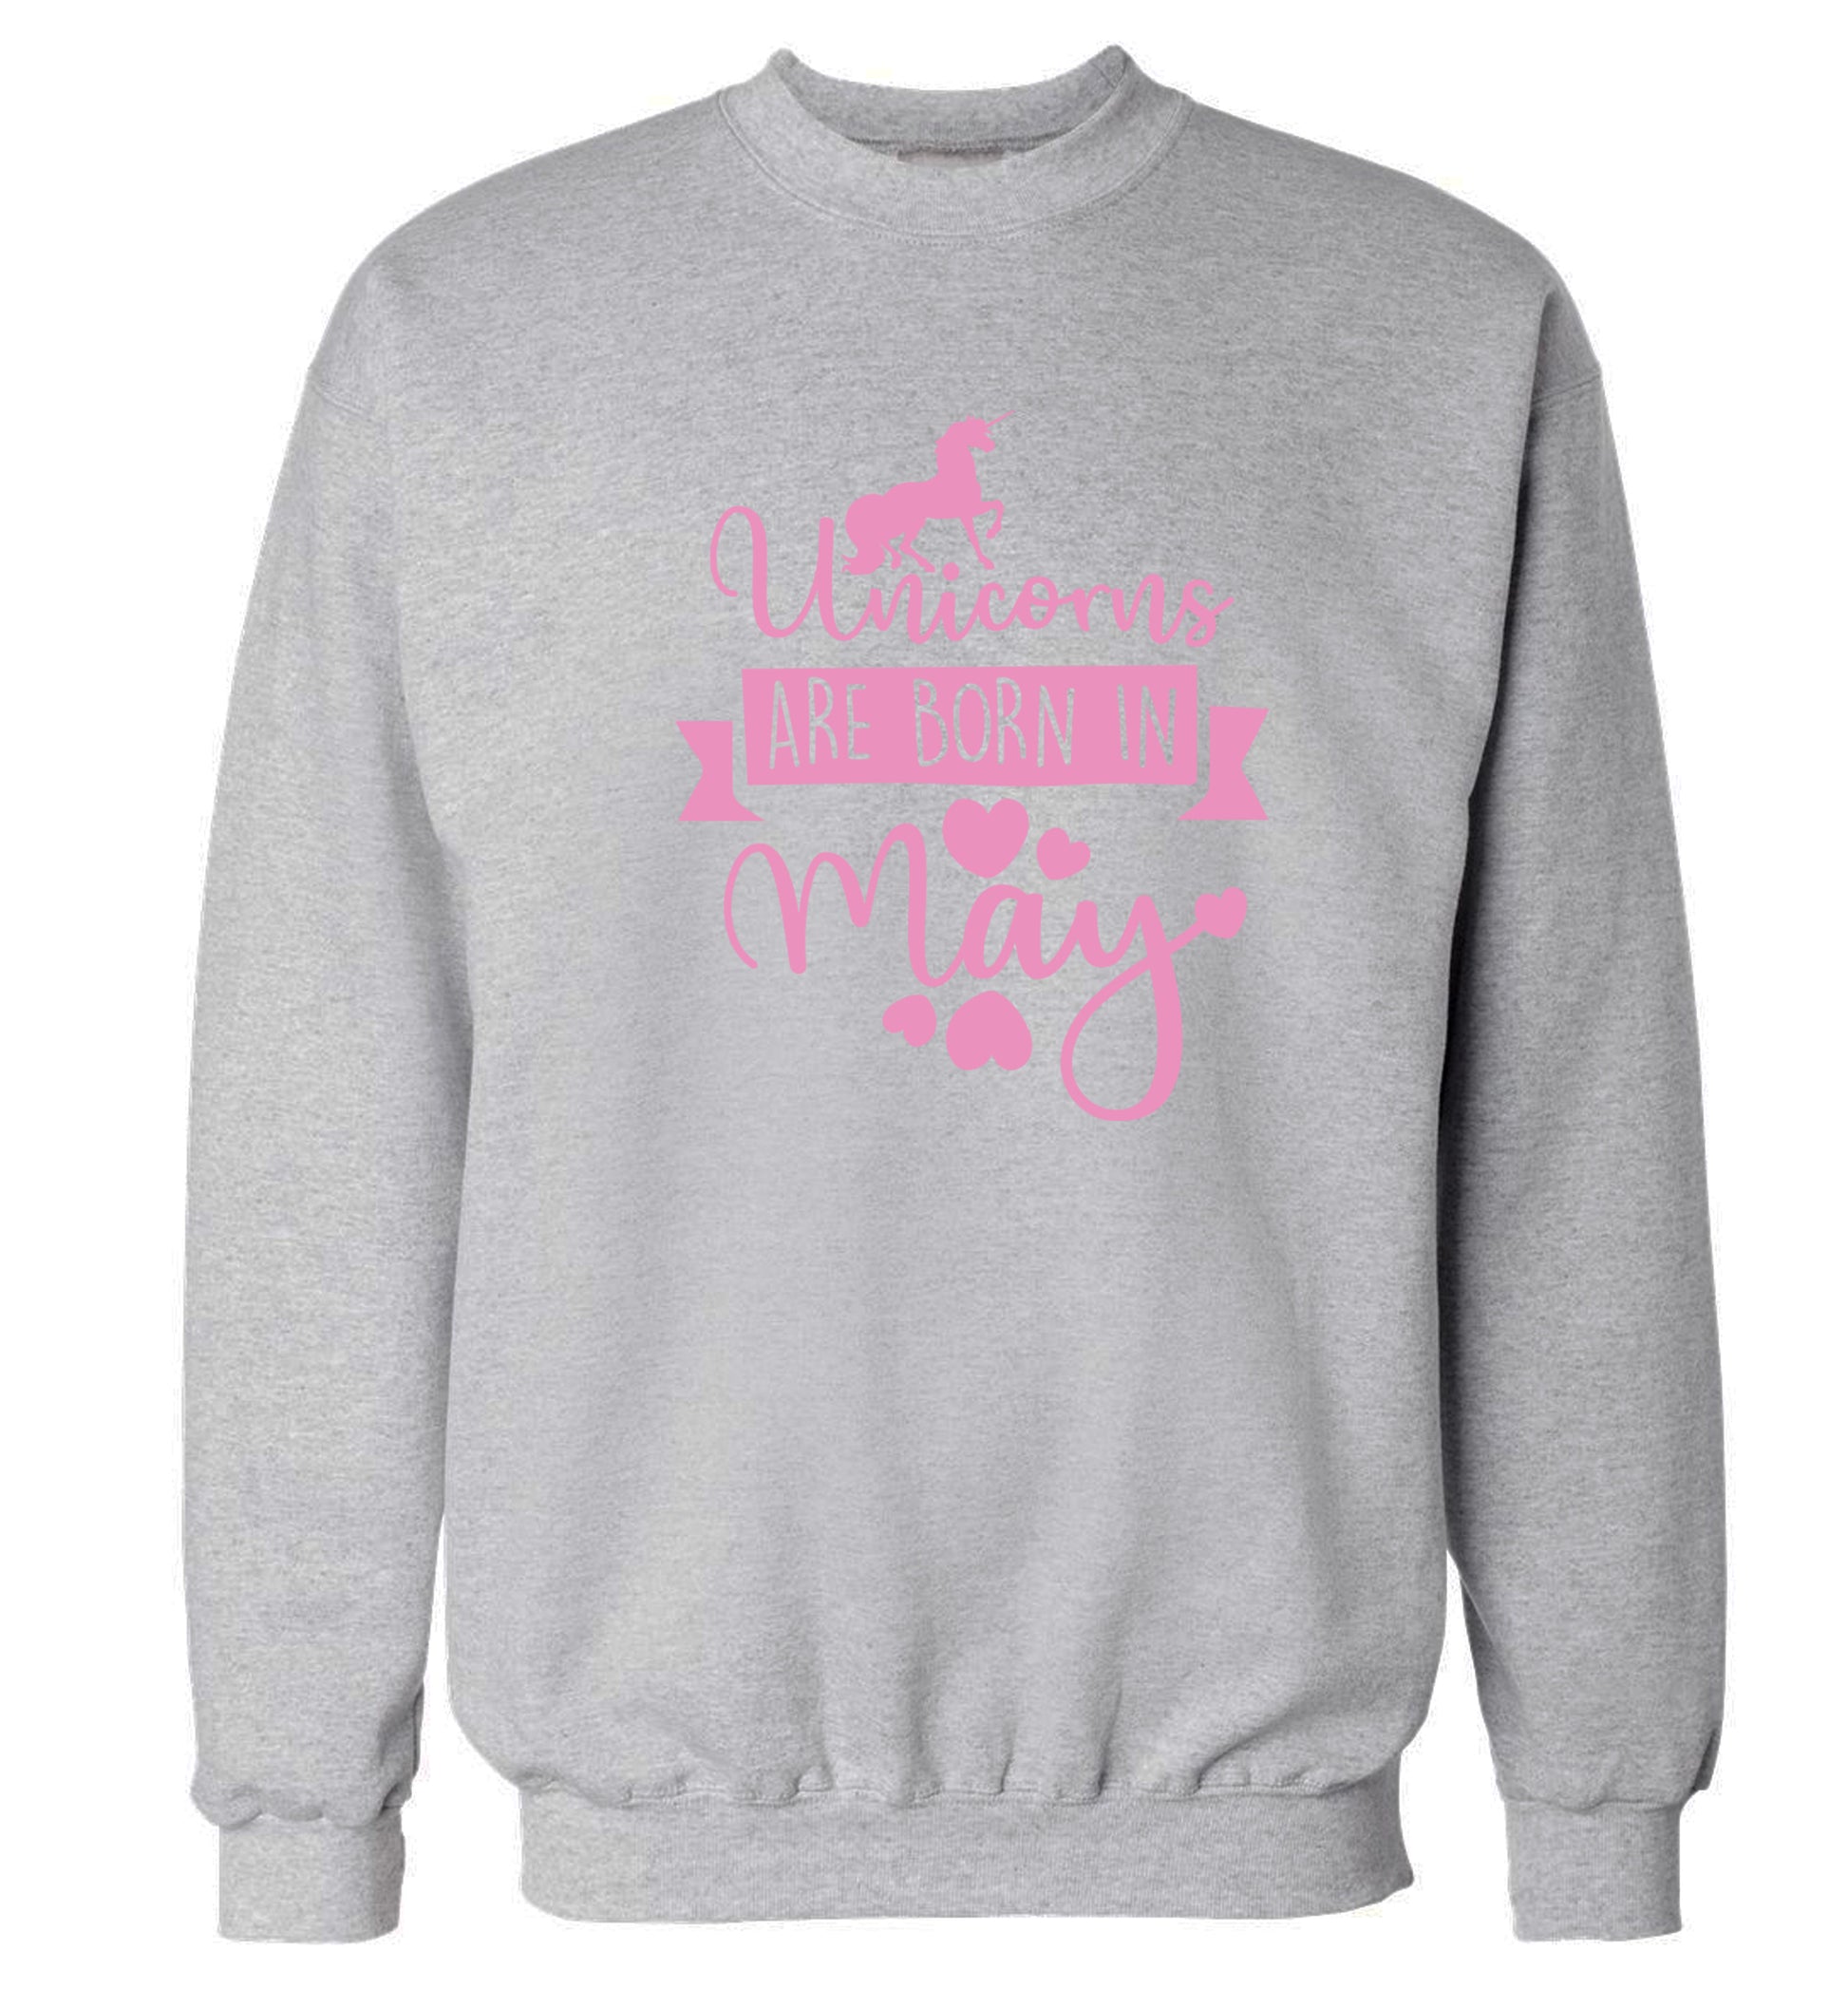 Unicorns are born in May Adult's unisex grey Sweater 2XL